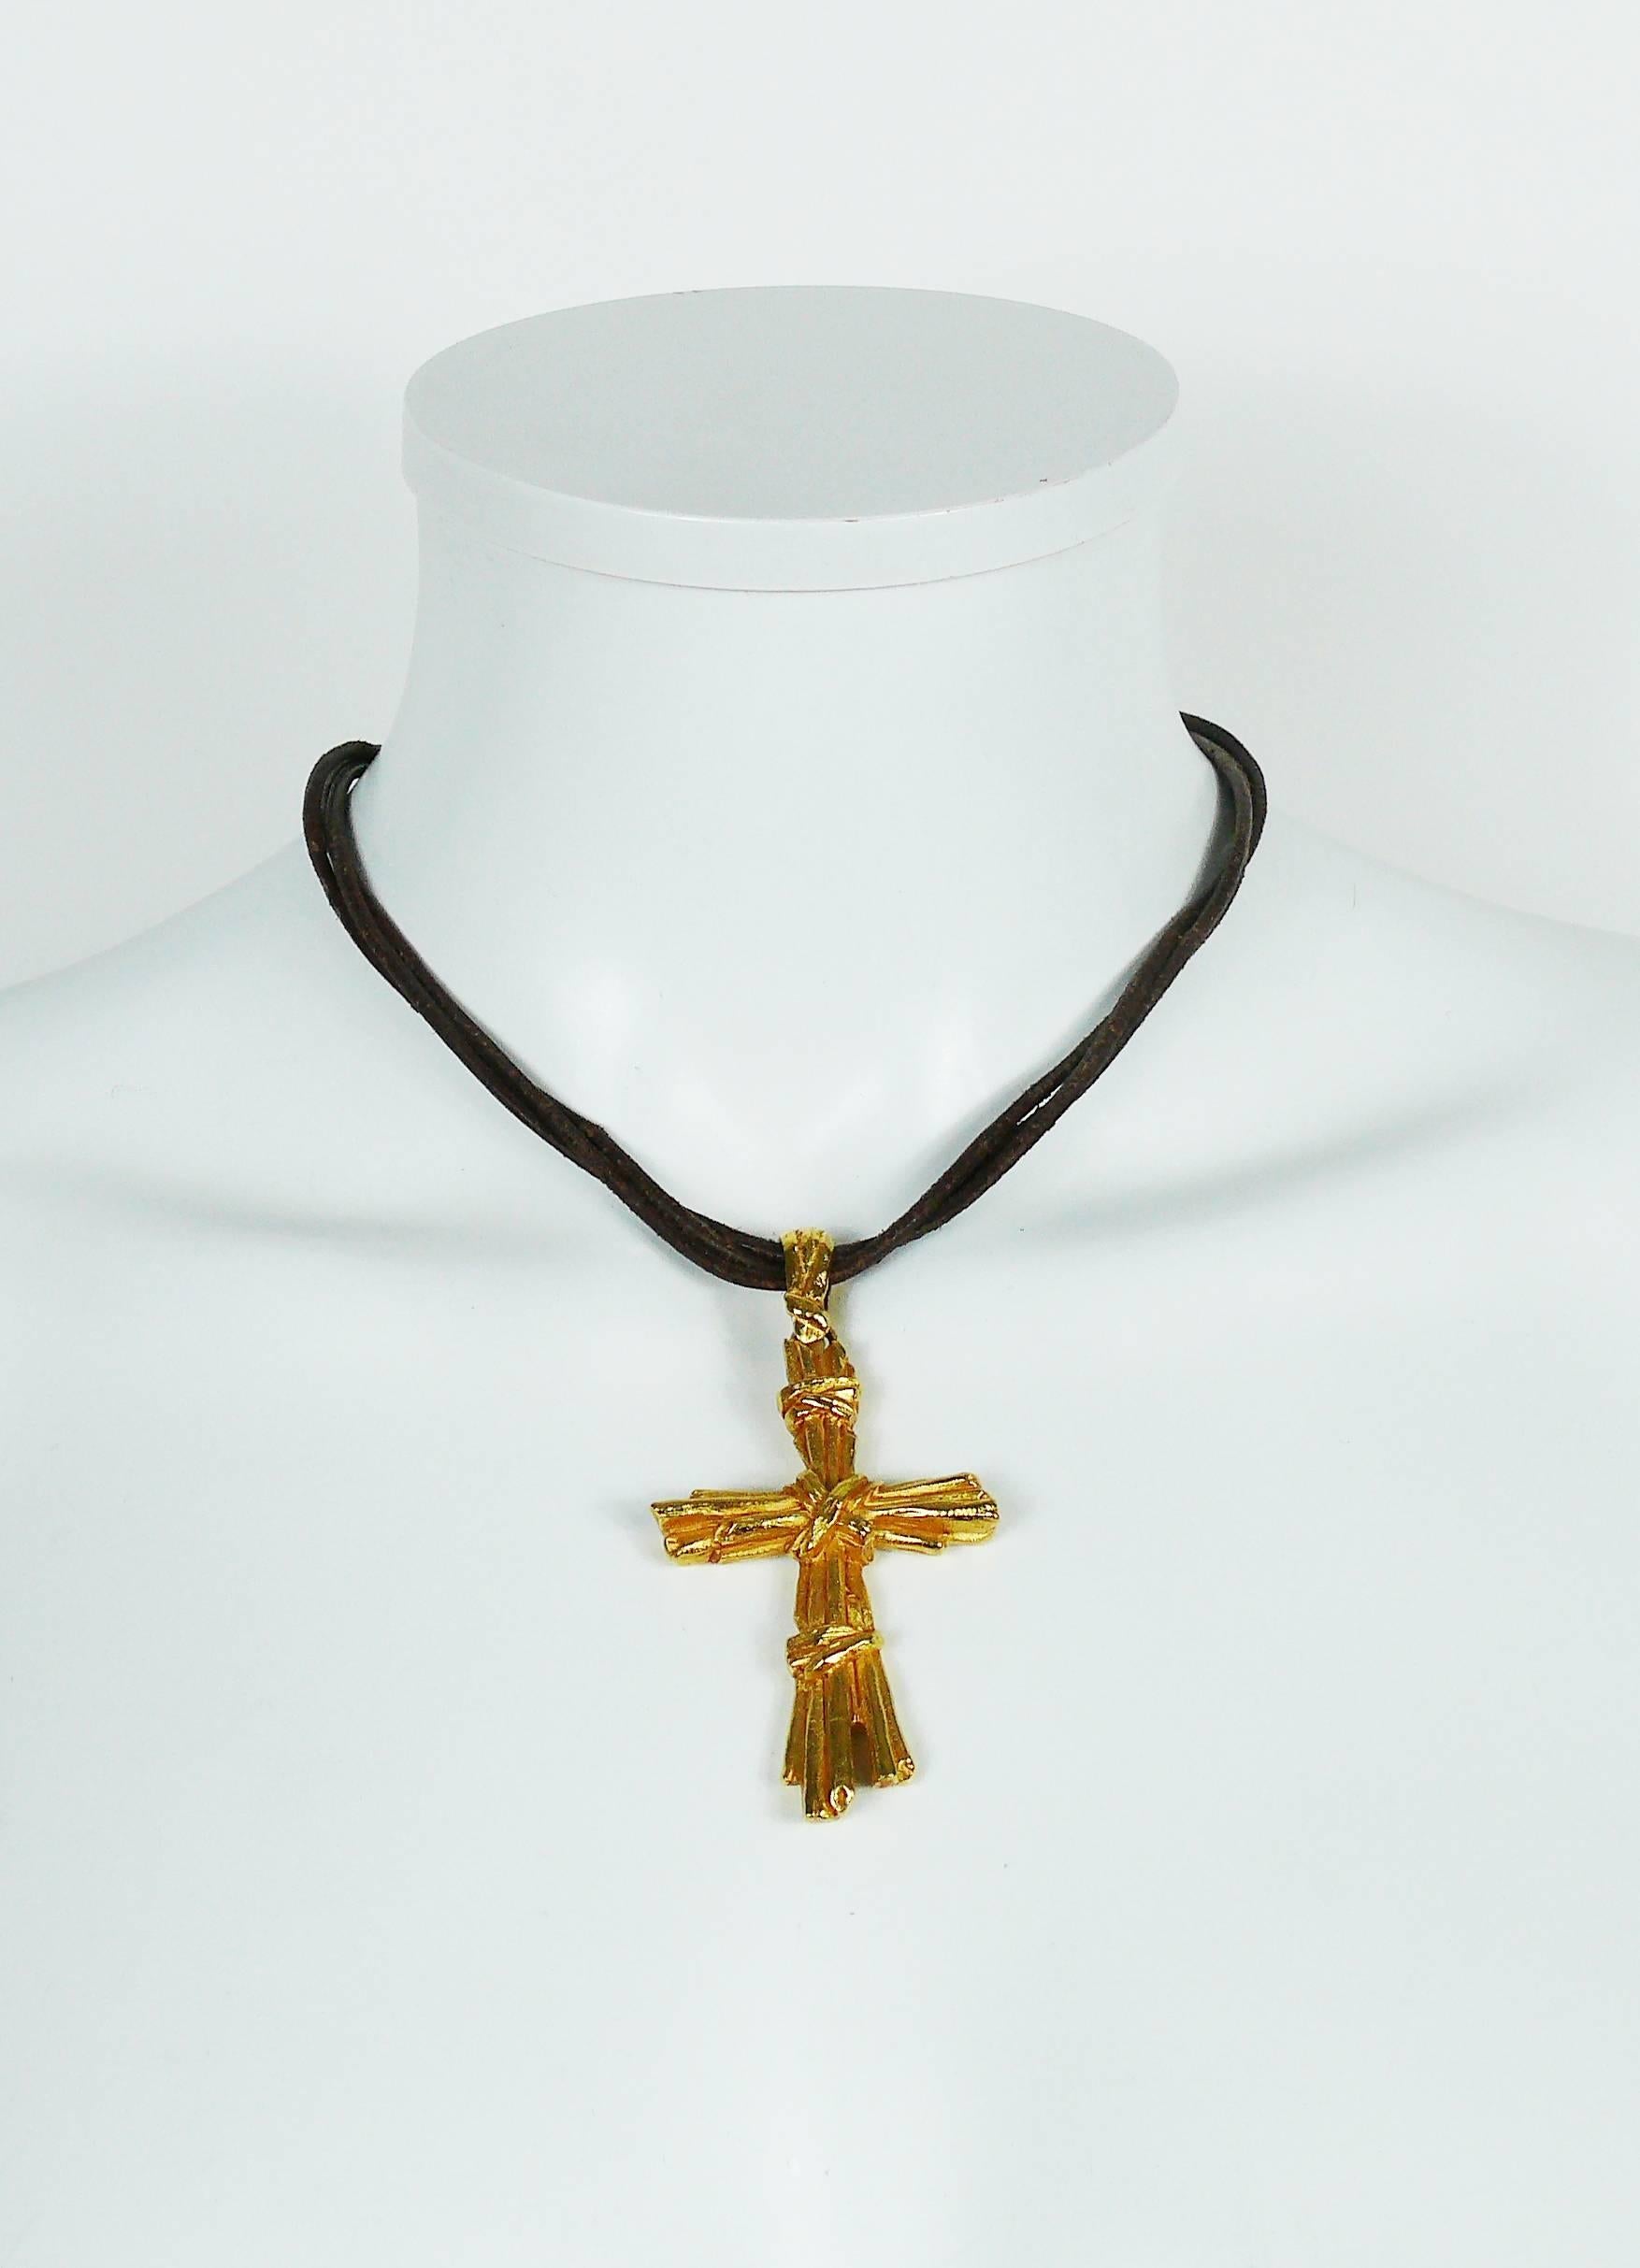 CHRISTIAN LACROIX vintage necklace featuring a gold toned cross with a bundle design.

Brown leather strap.
Hook clasp closure.
Extension chain.

Marked CHRISTIAN LACROIX CL Made in France.

Indicative measurements : adjustable length from approx.